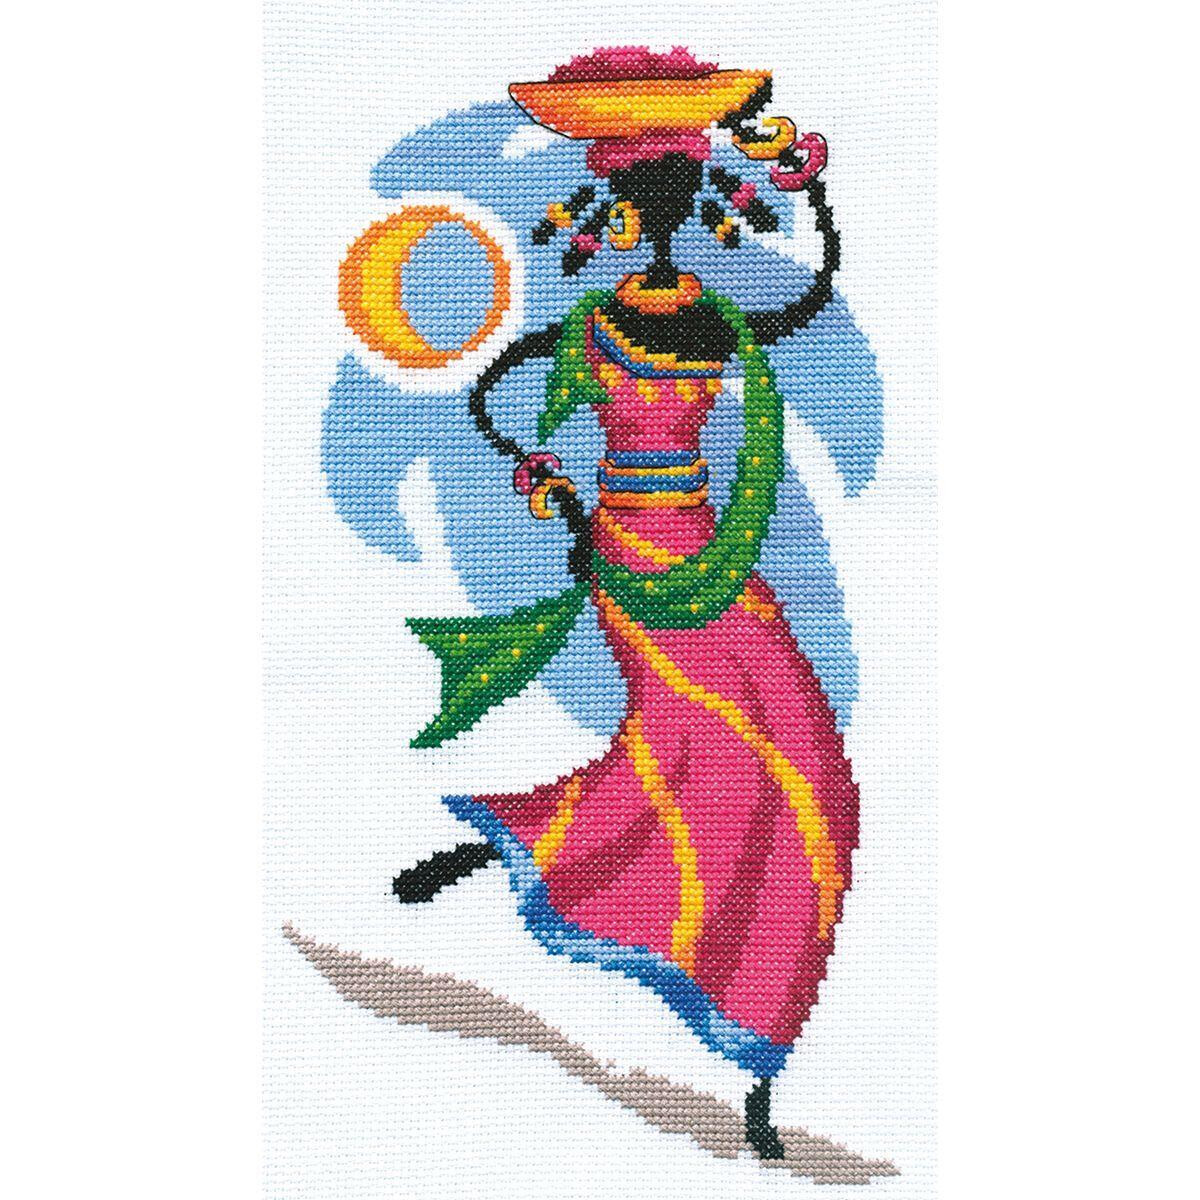 Panna counted cross stitch kit "Africas...